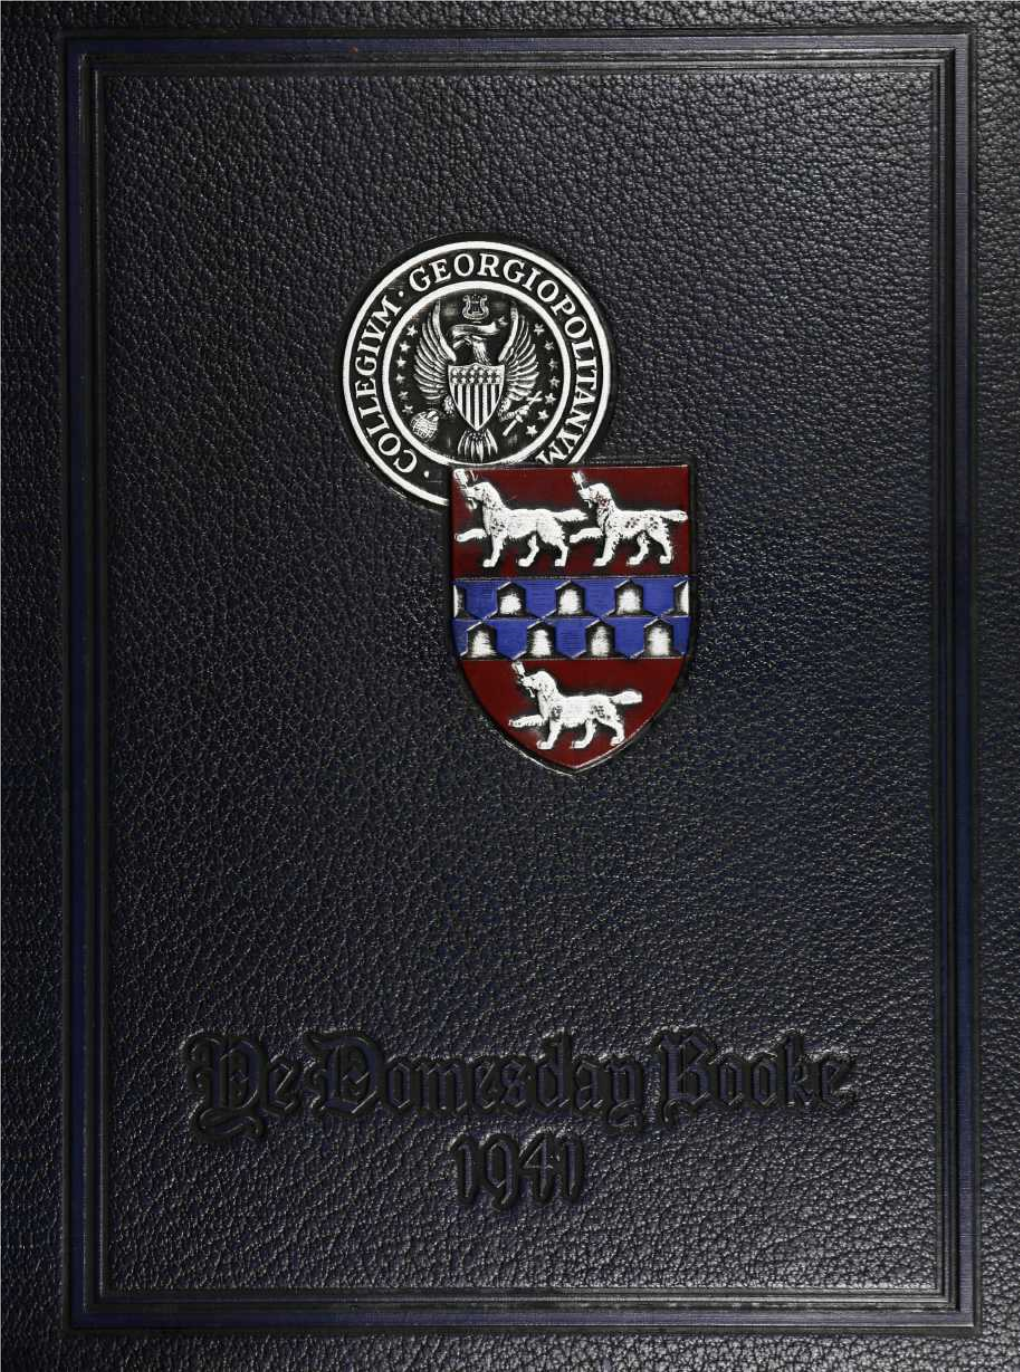 Gt Yearbooks 1941 St.Pdf (19.MB)